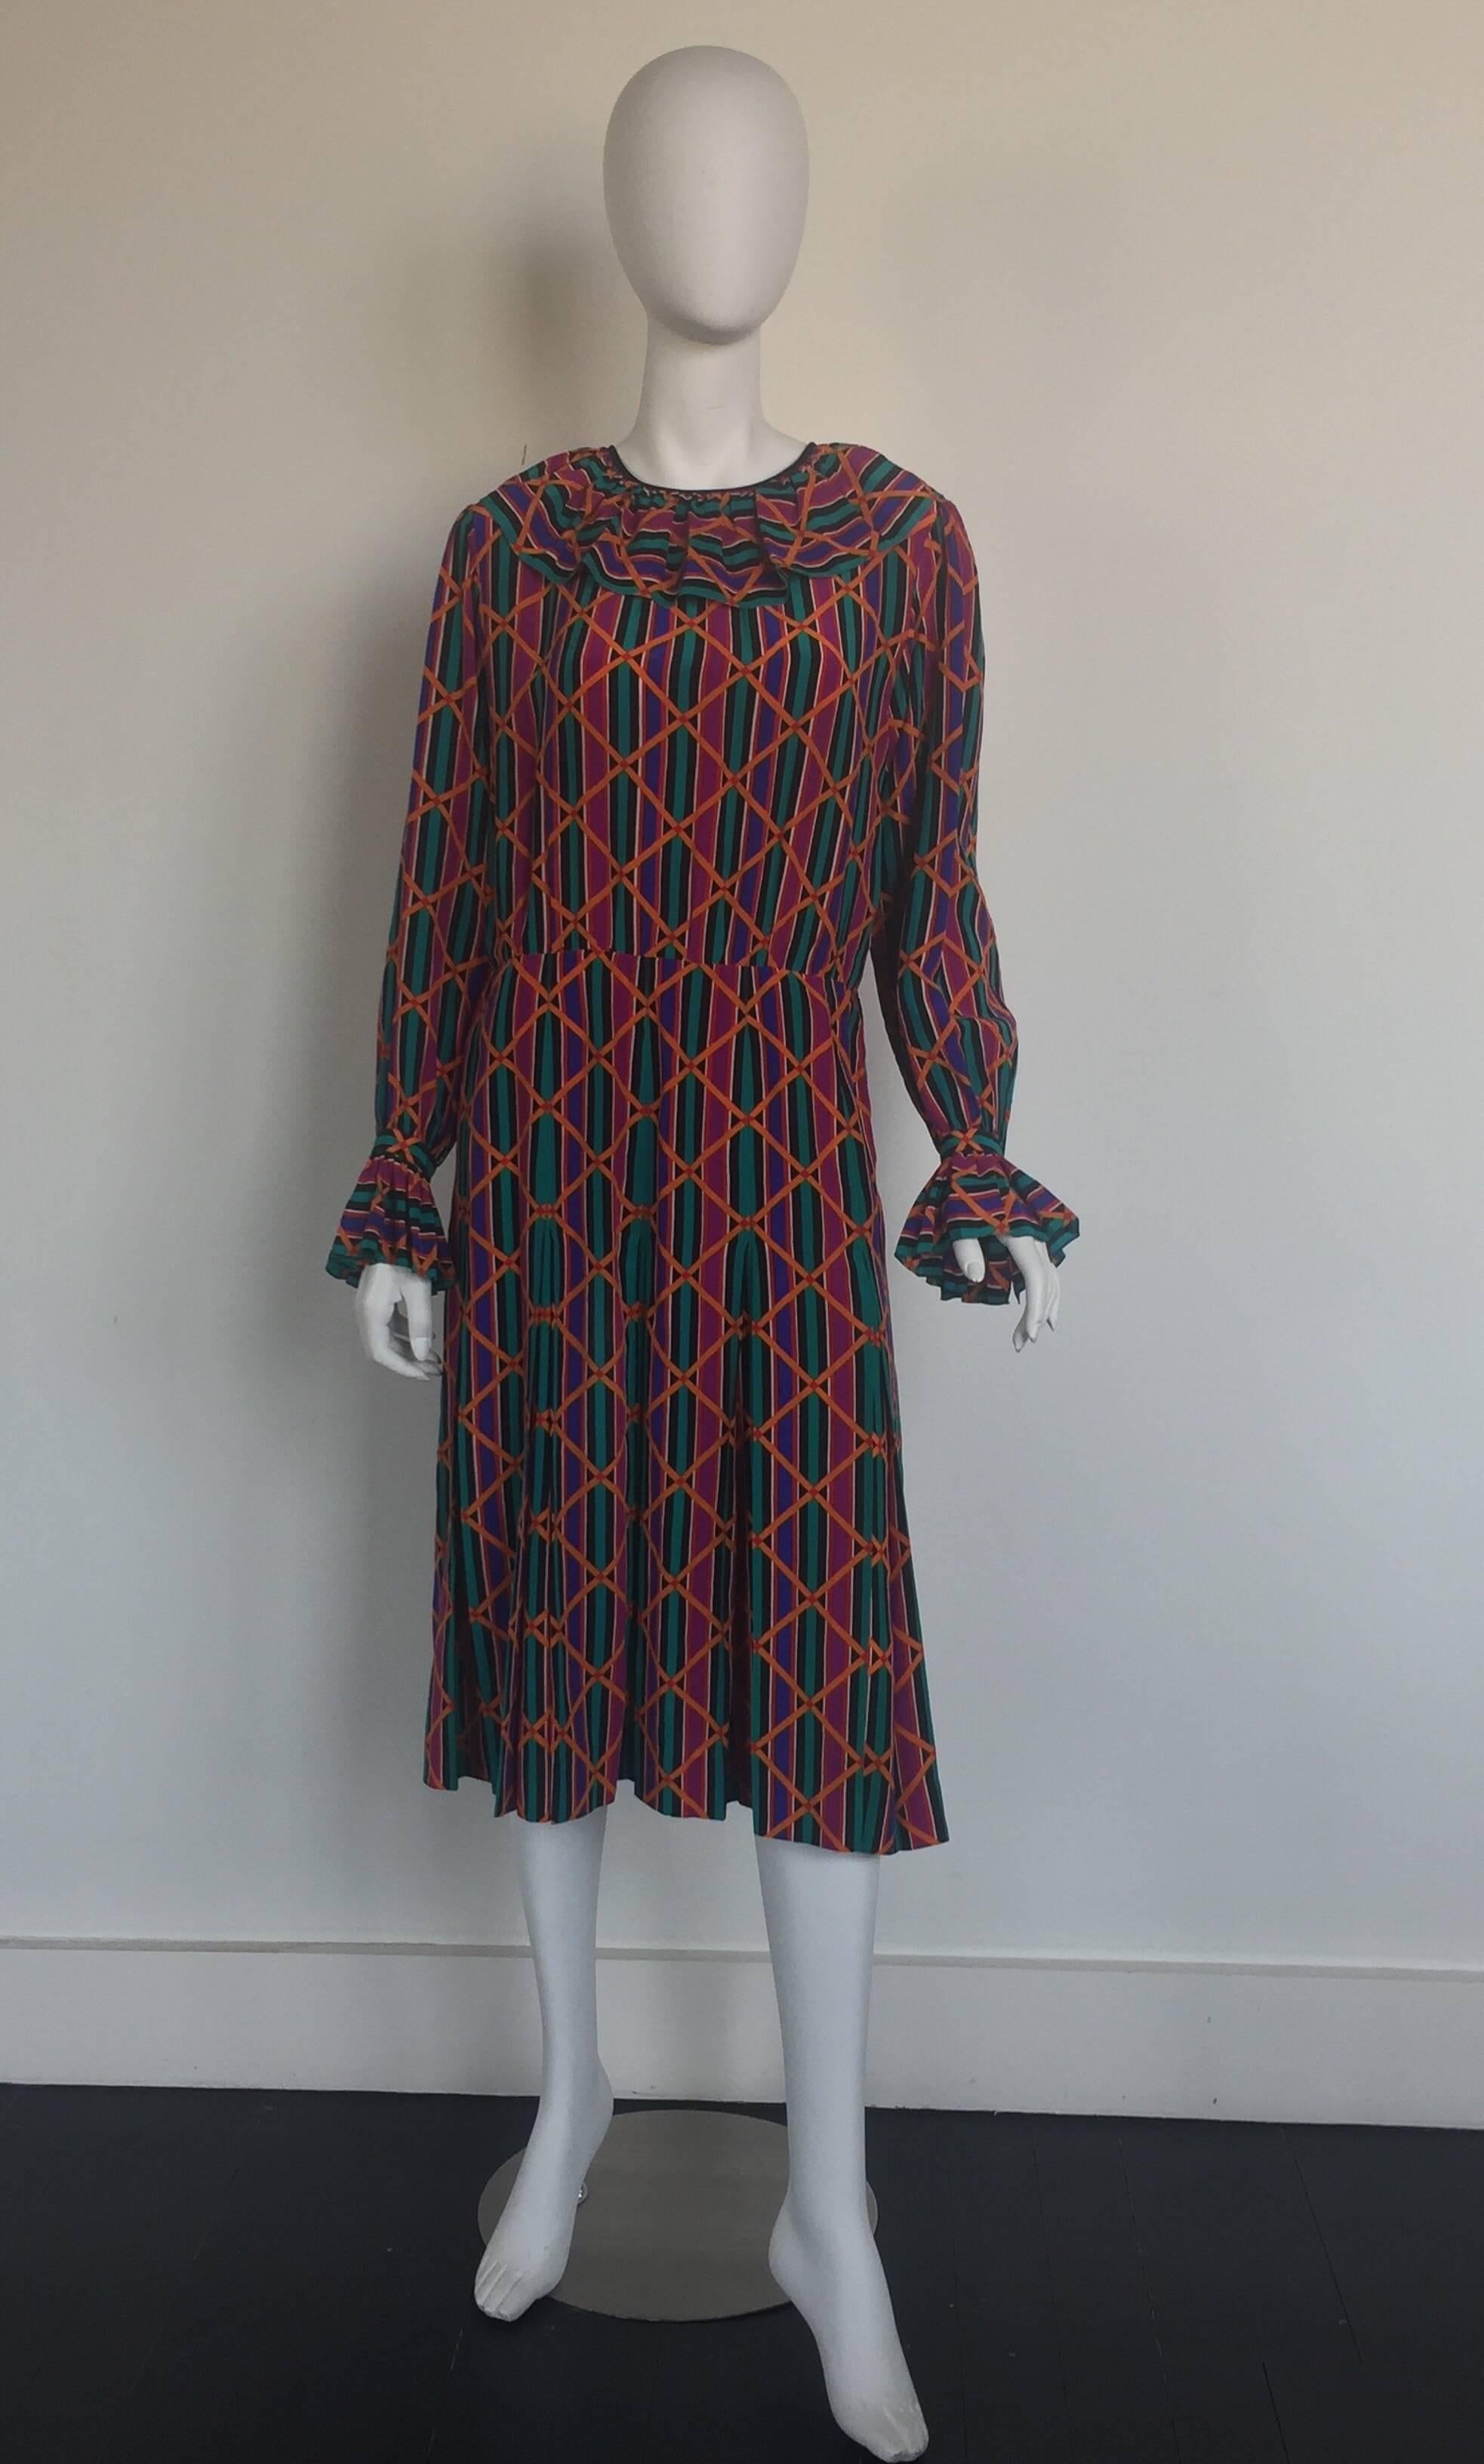 This Yves Saint Lauren colorful ruffle dress is from the 1970s.  